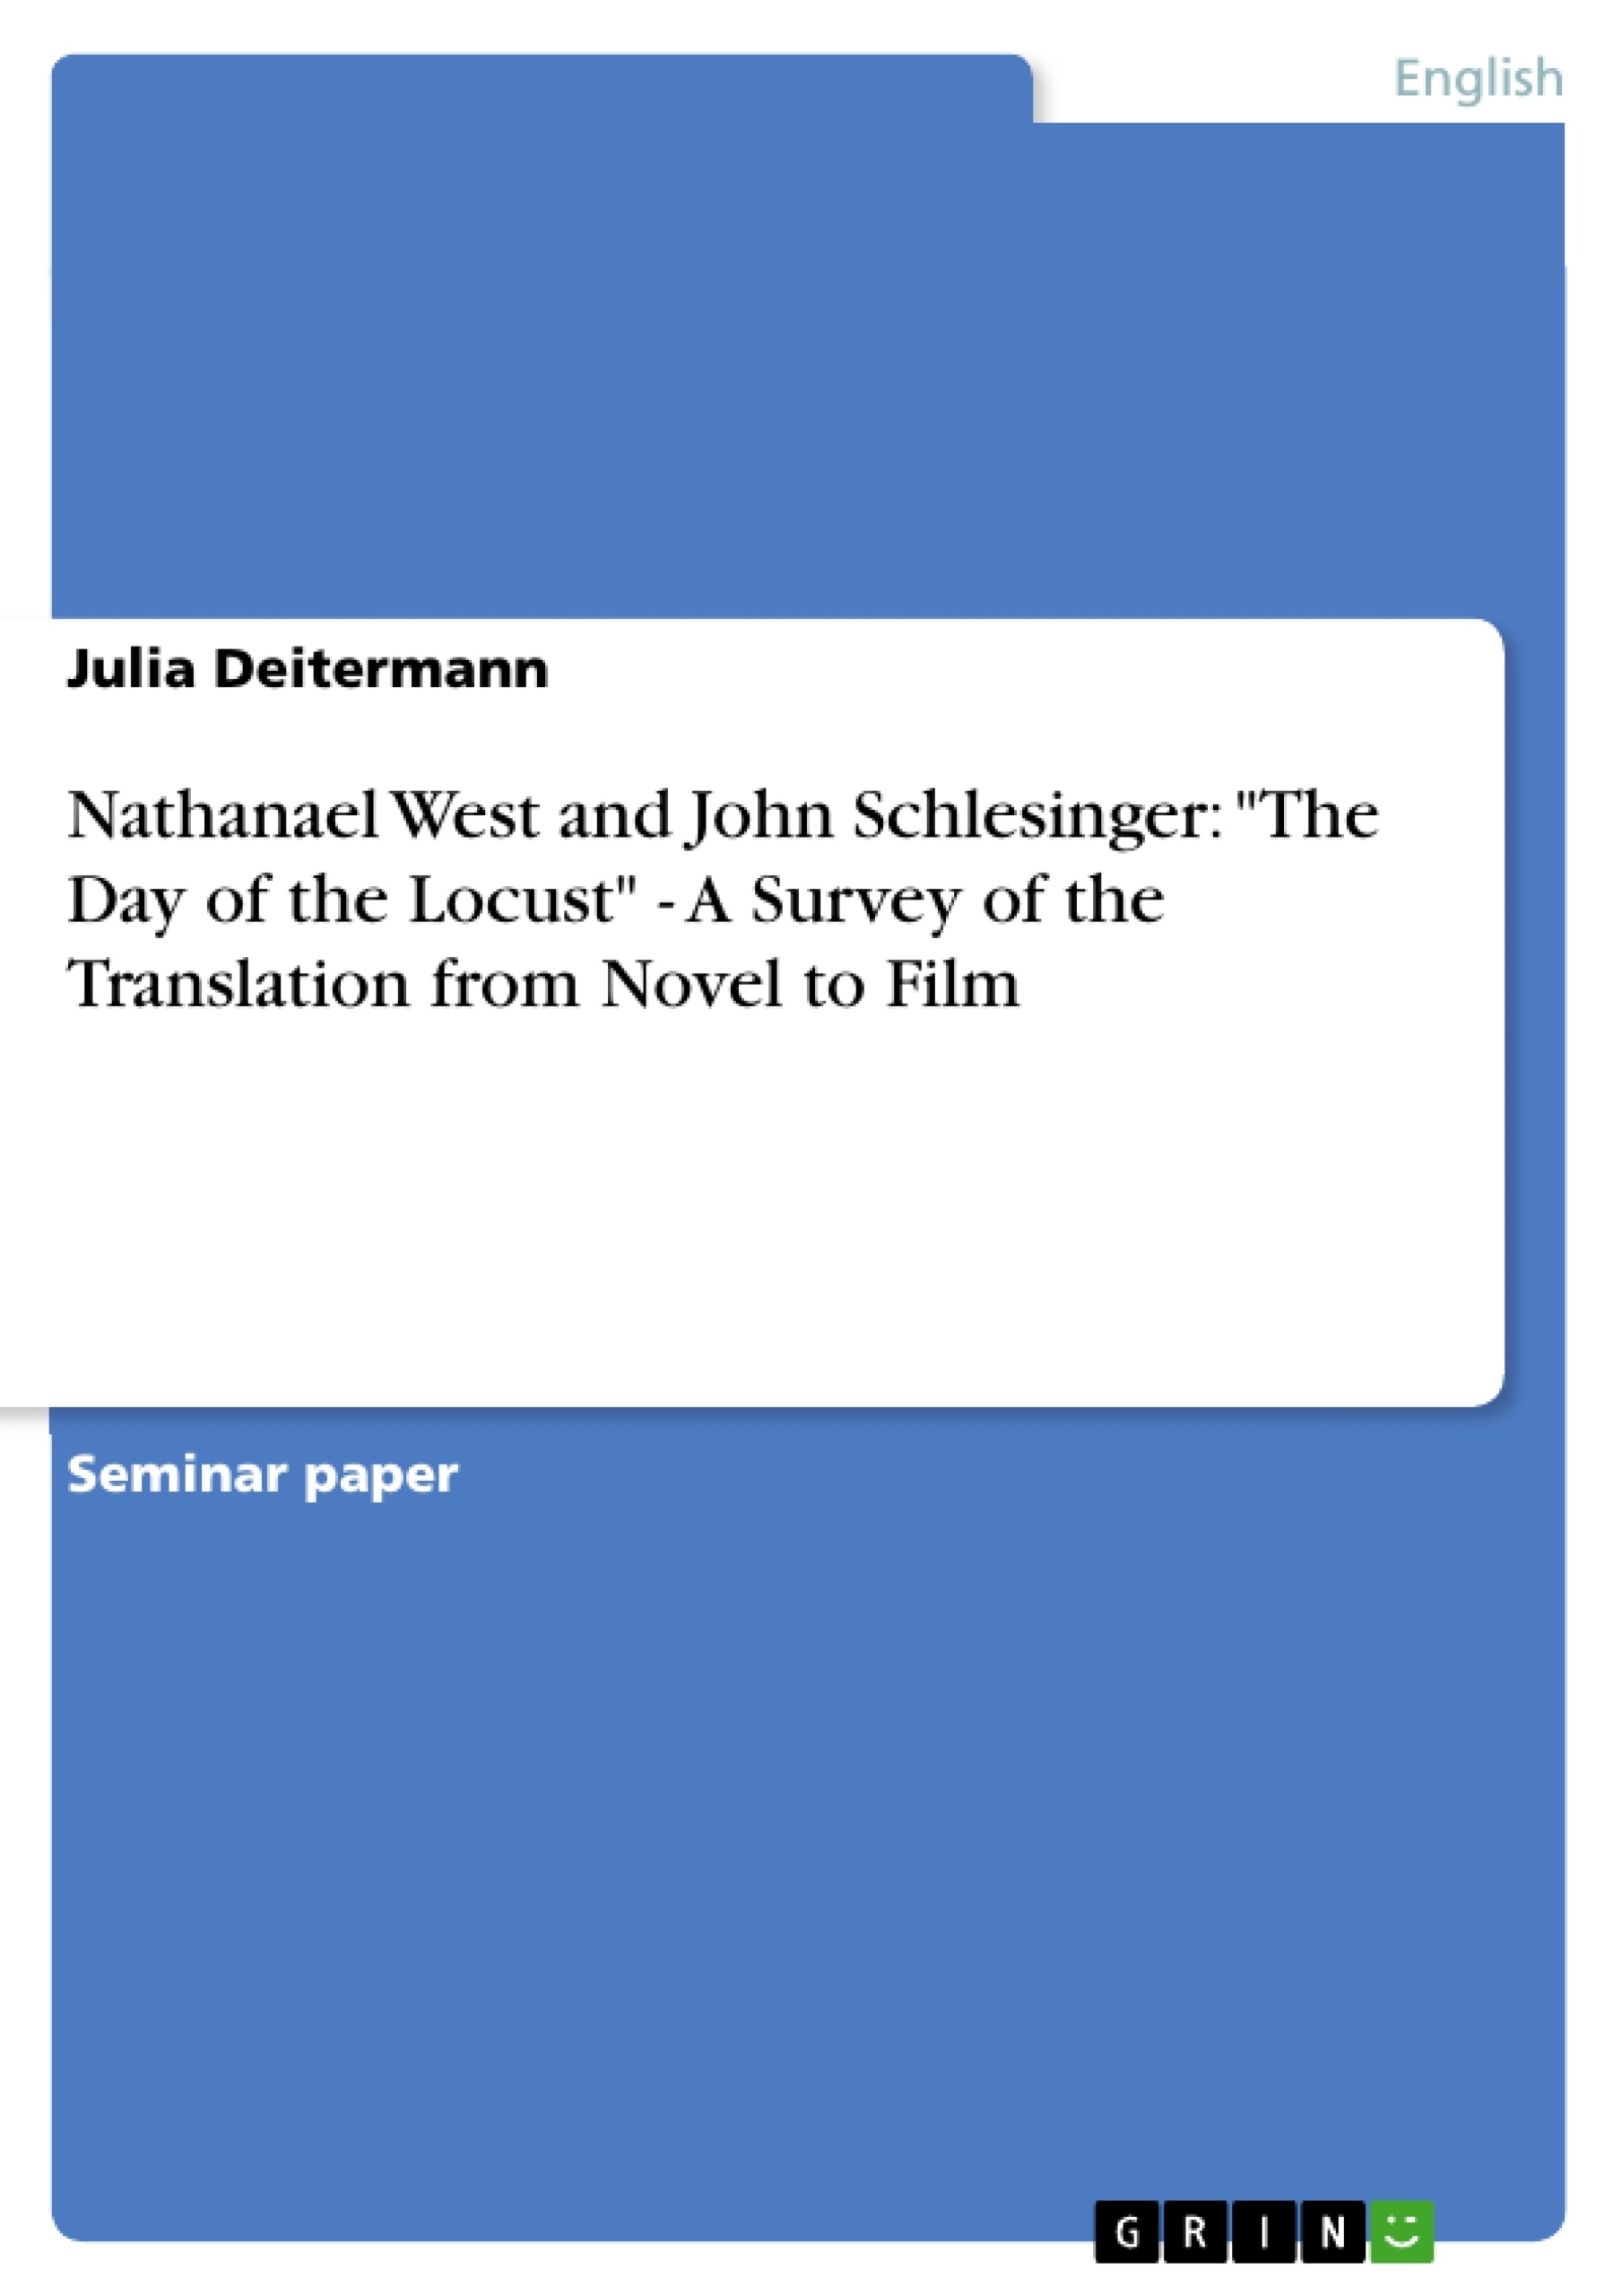 Title: Nathanael West and John Schlesinger: "The Day of the Locust" - A Survey of the Translation from Novel to Film